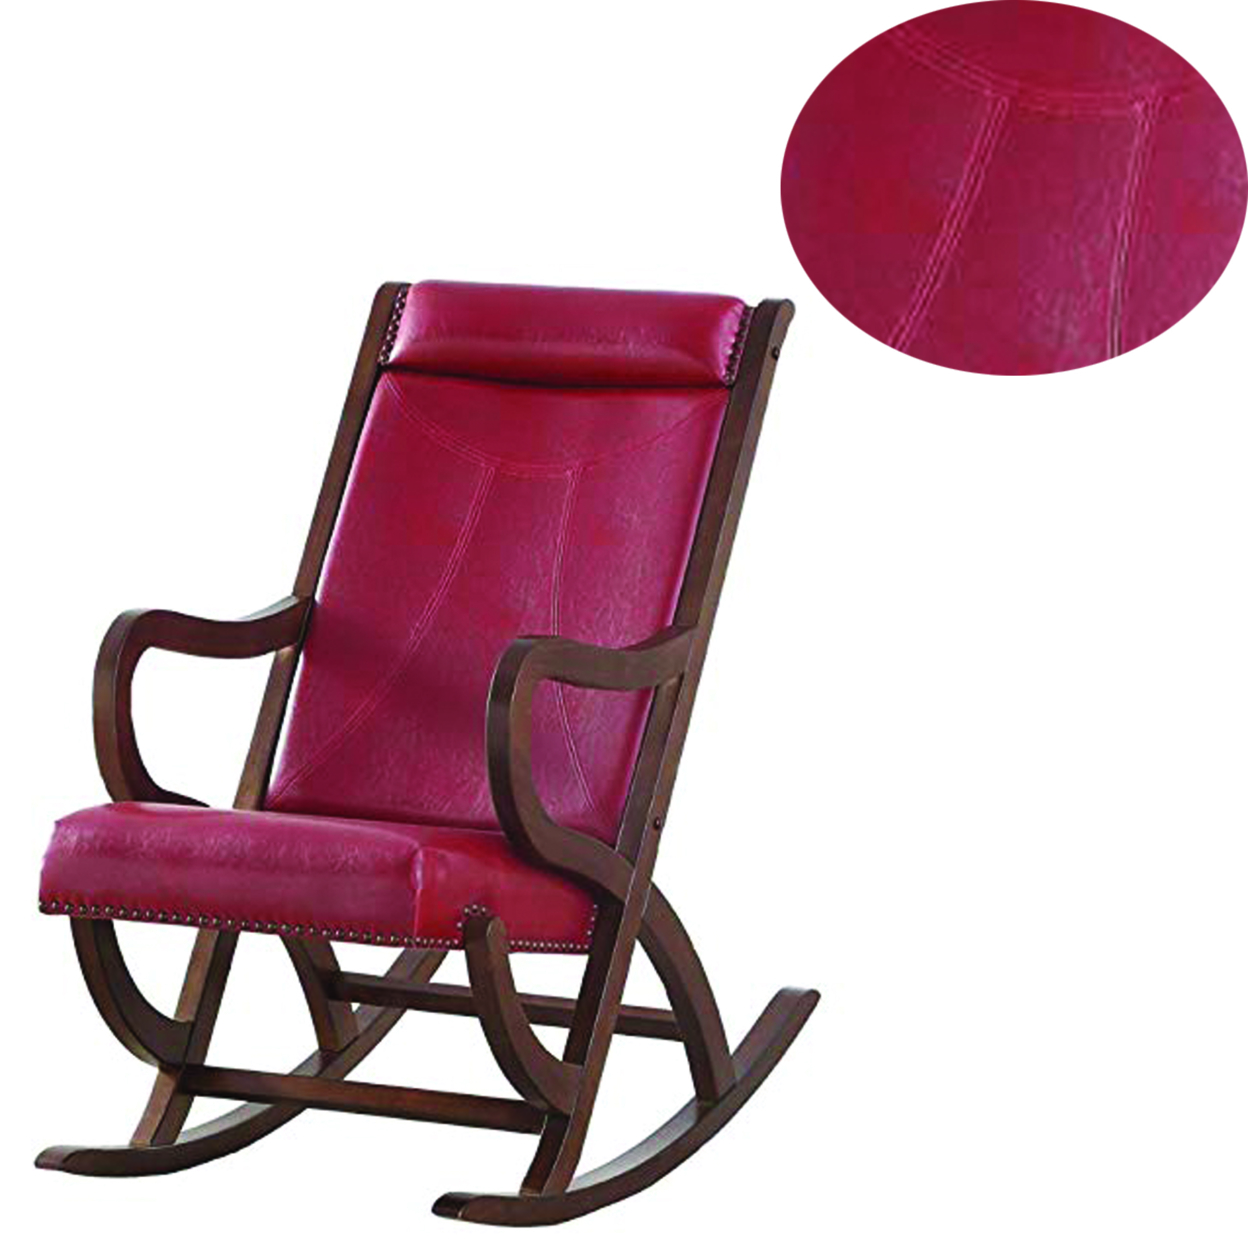 Faux Leather Upholstered Wooden Rocking Chair With Looped Arms, Brown And Red- Saltoro Sherpi